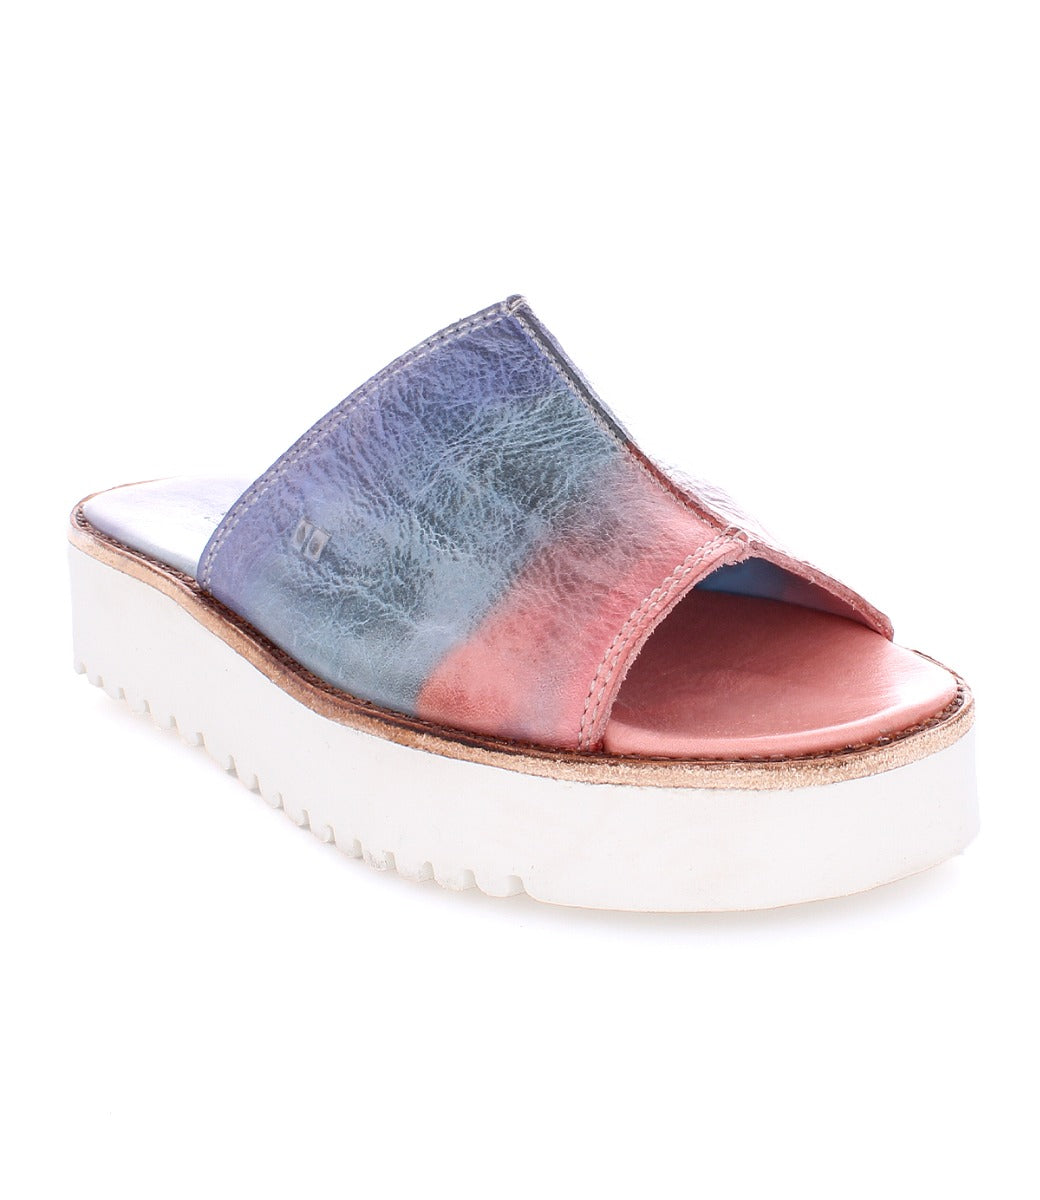 A women's Fairlee II sandal by Bed Stu with a multi - colored stripe.